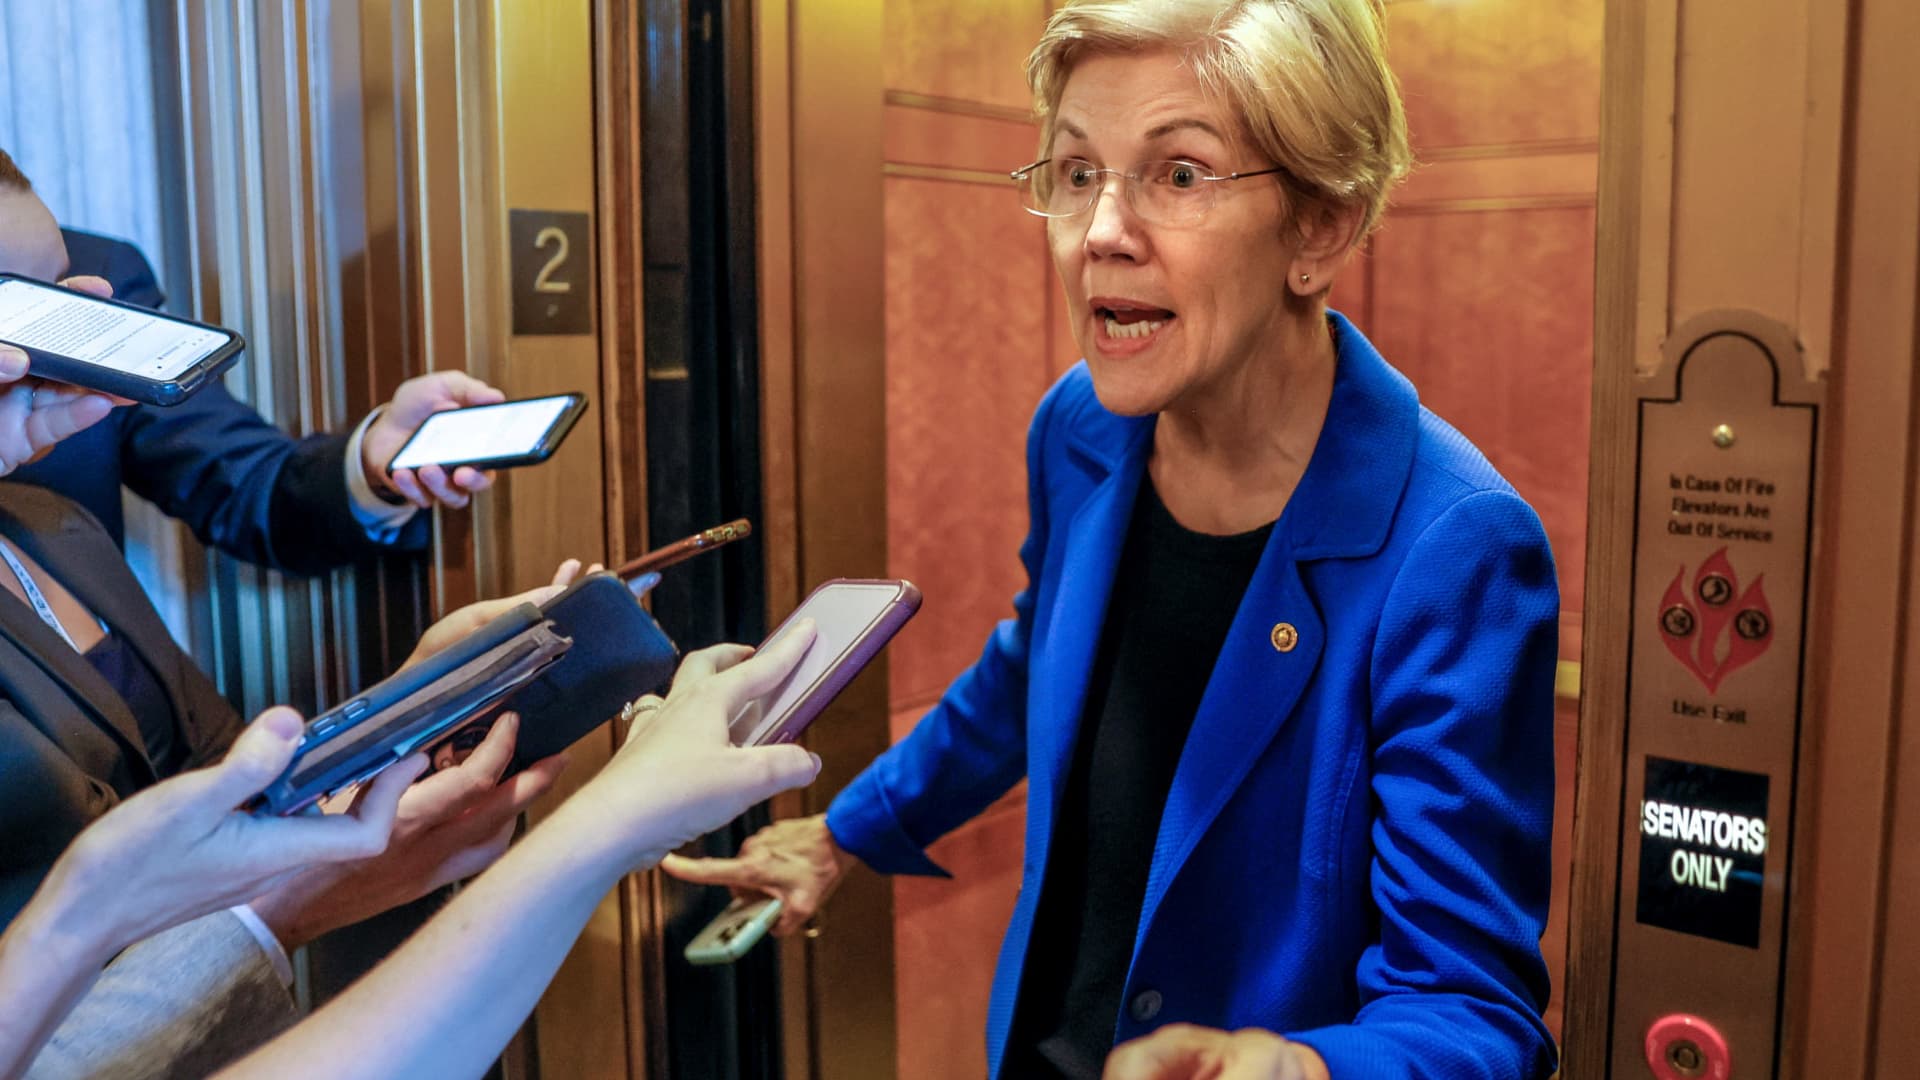 Warren unveils bill to repeal Trump-era lender deregulation she claims led to SVB, Signature collapses